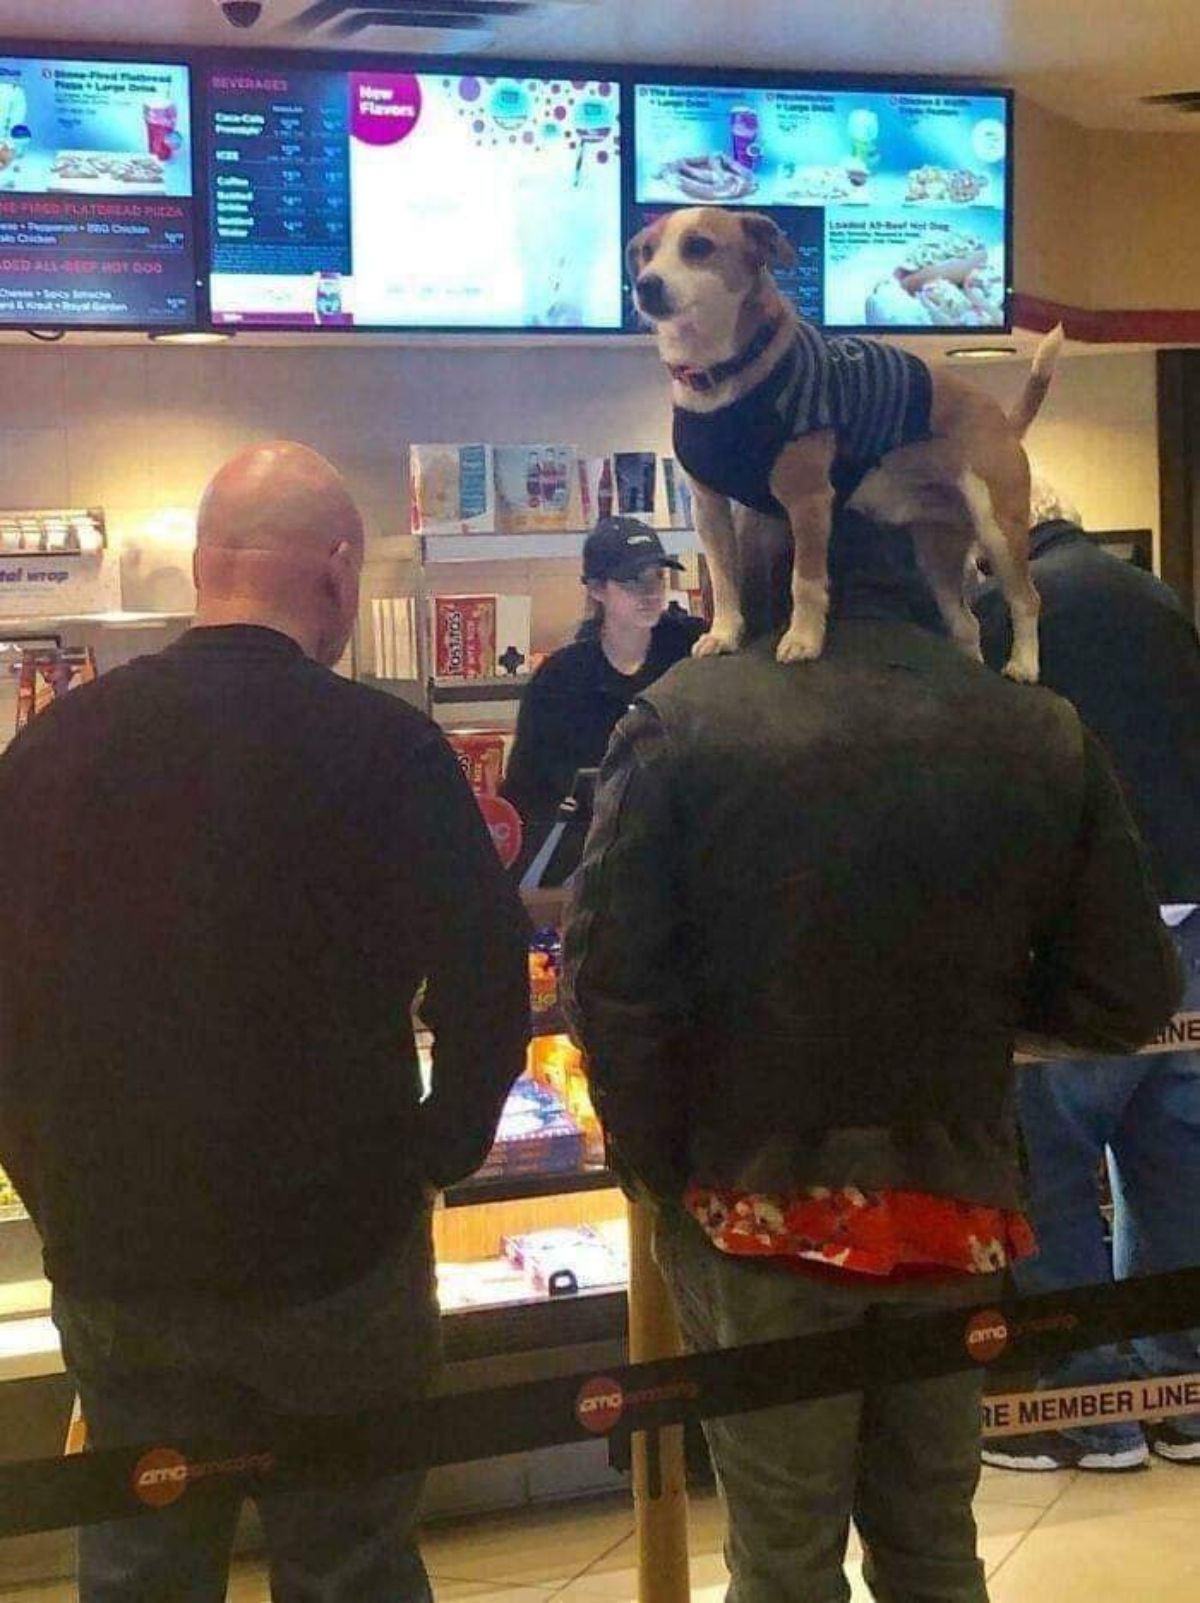 2 men standing at a restaurant with a brown and white dog wearing a dark blue sweater standing on the shoulders of one of the men